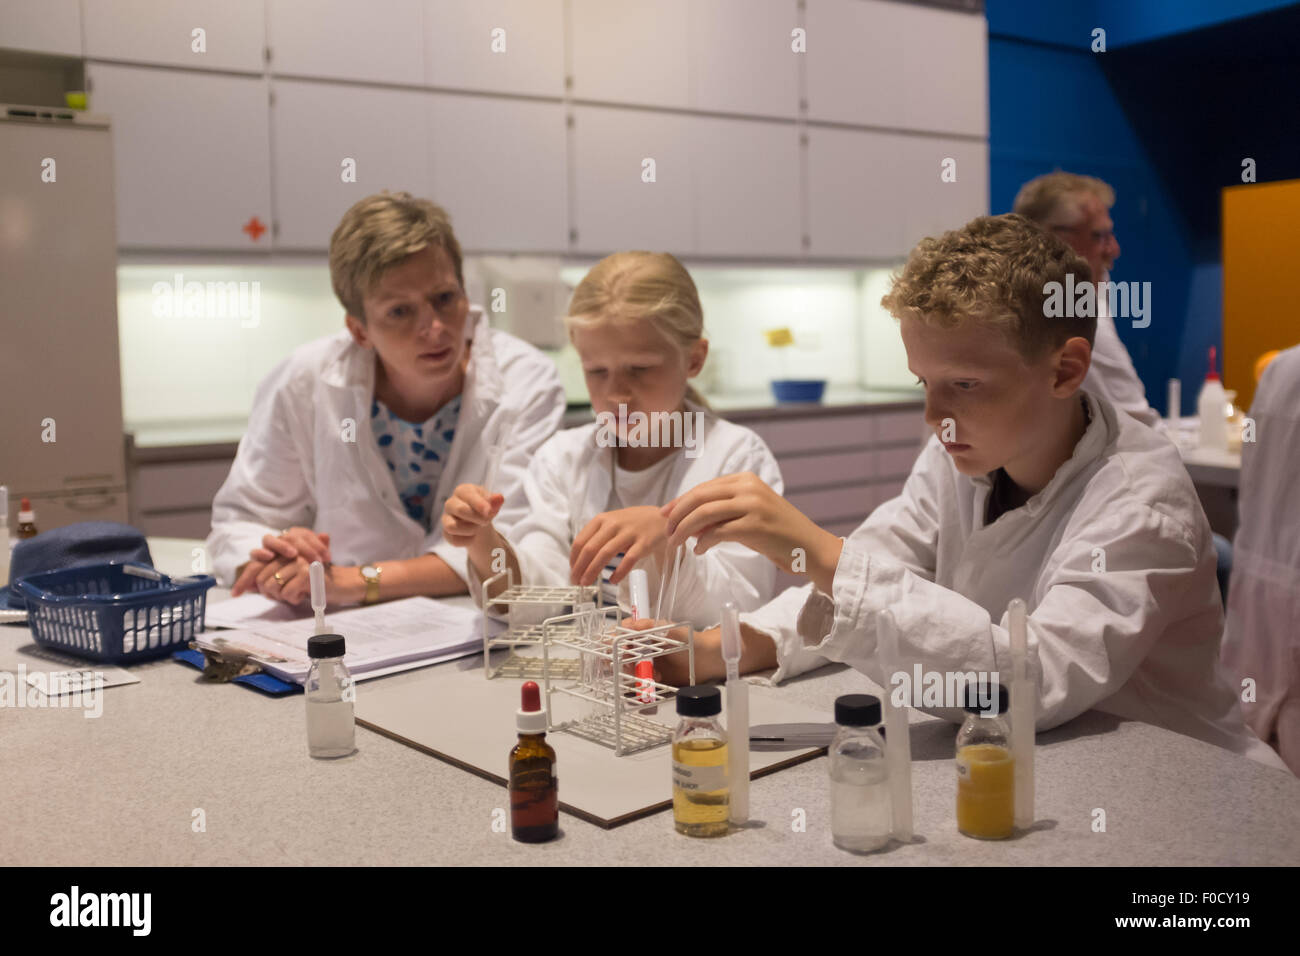 Children in a chemistry lesson doing practical experiments Stock Photo